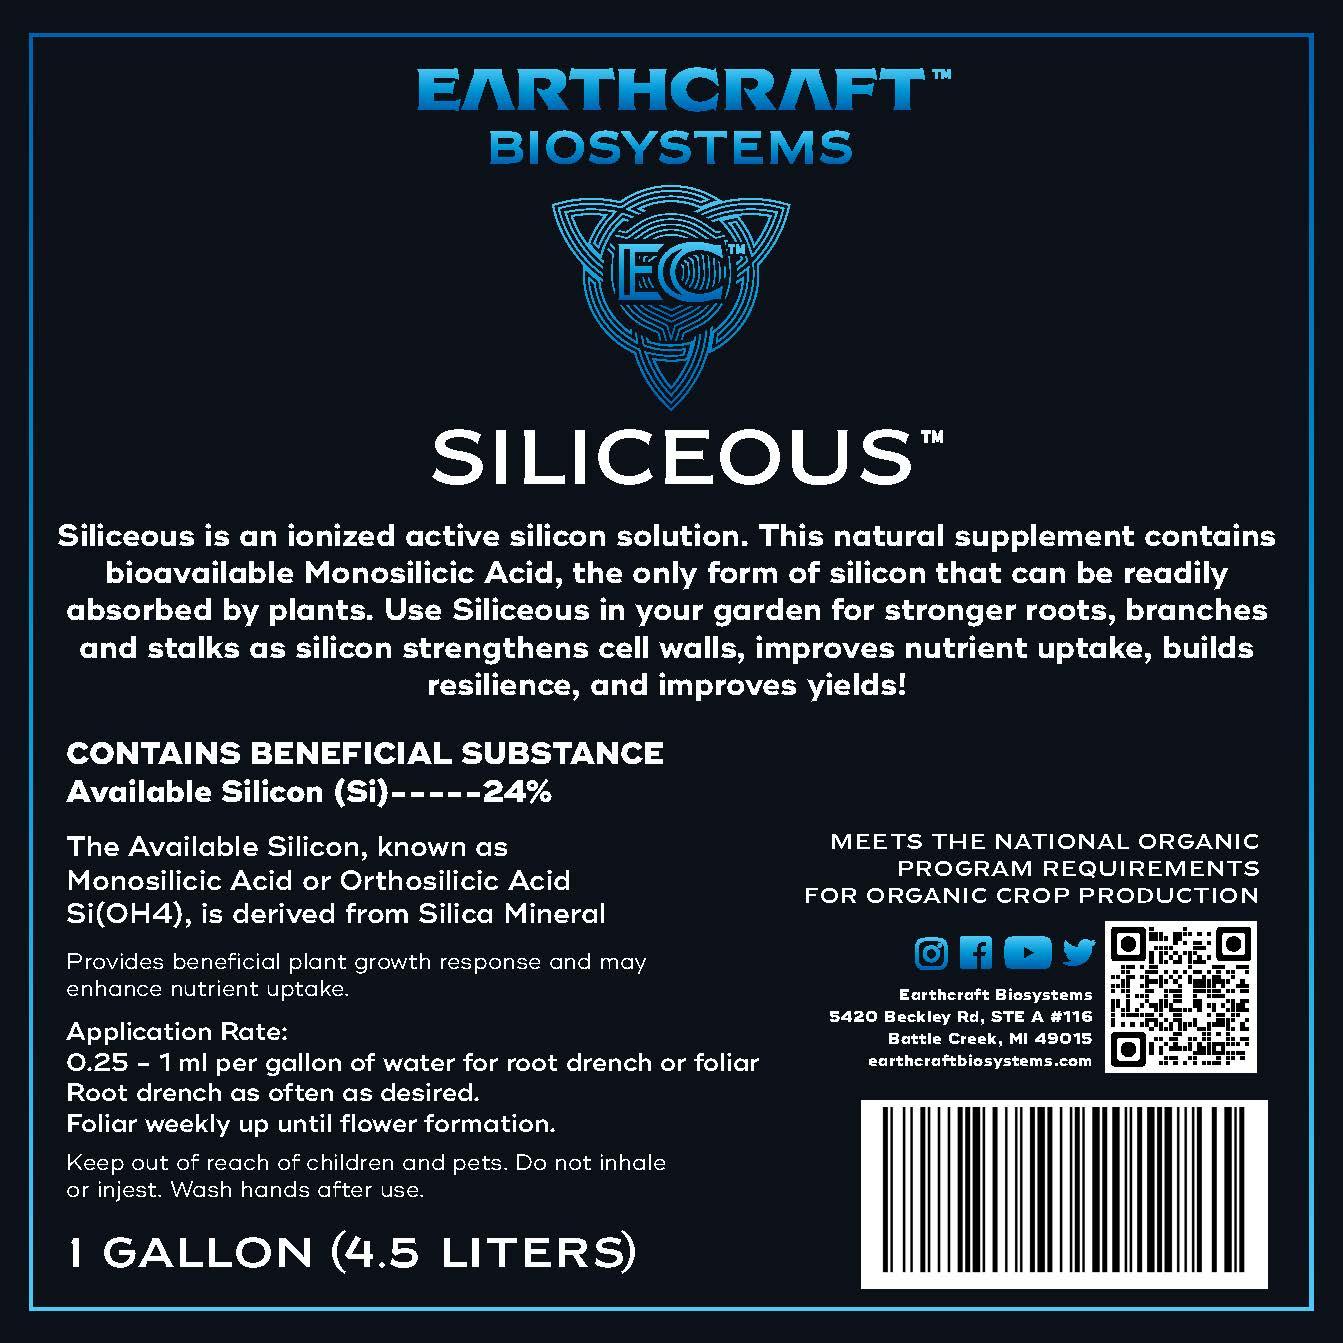 Siliceous is an ionized active silicon solution. This natural supplement contains bioavailable Monosilicic Acid